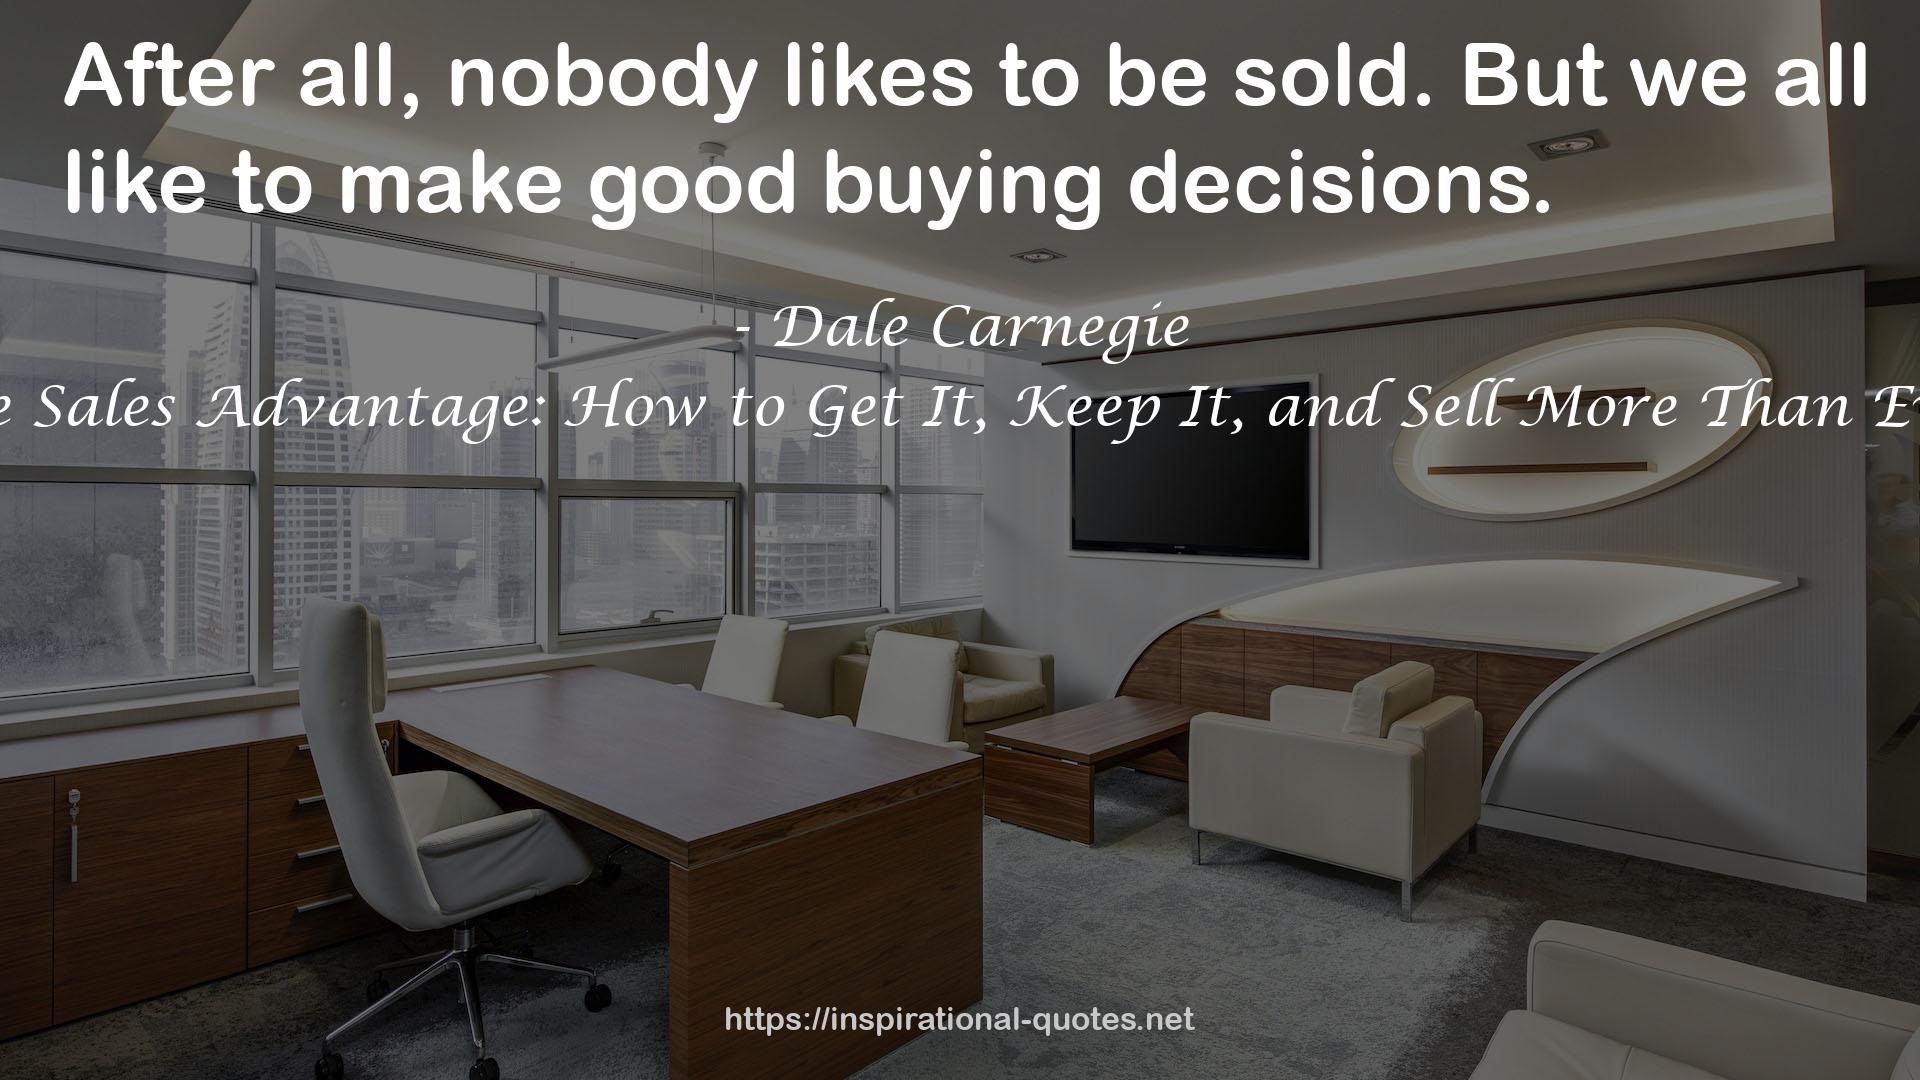 The Sales Advantage: How to Get It, Keep It, and Sell More Than Ever QUOTES